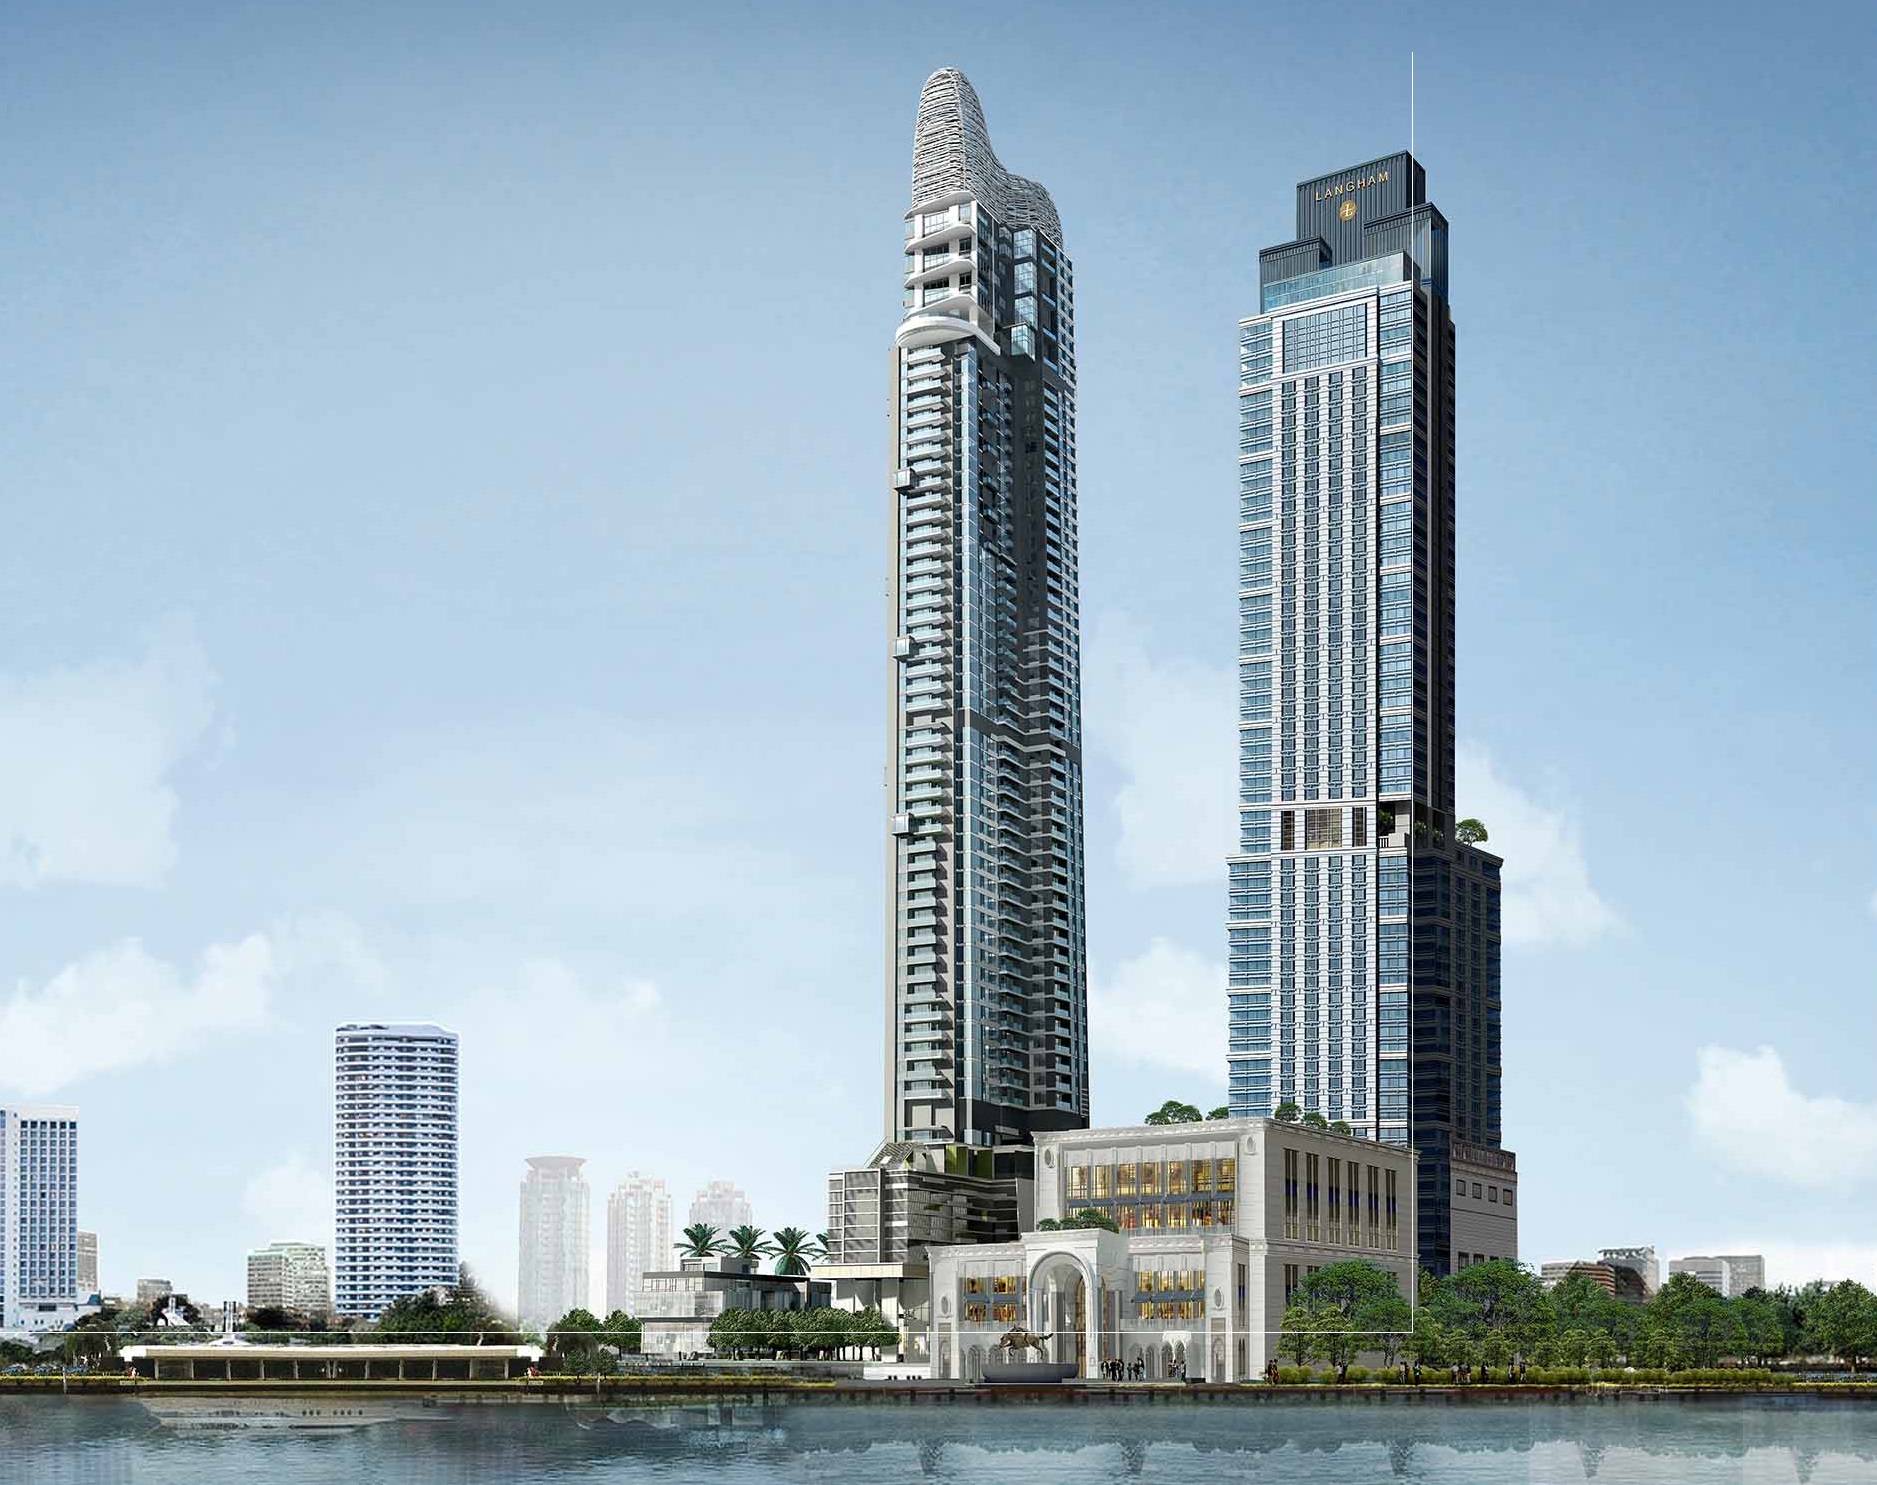 Langham has signed an agreement with Canapaya Development Co. Ltd to manage a luxury new hotel on the bank of the Chao Phraya River in Bangkok, Thailand. Only ten minutes from Sathorn CBD, The Langham, Bangkok at Chao Phraya River is expected to open in 2021. Click to enlarge.